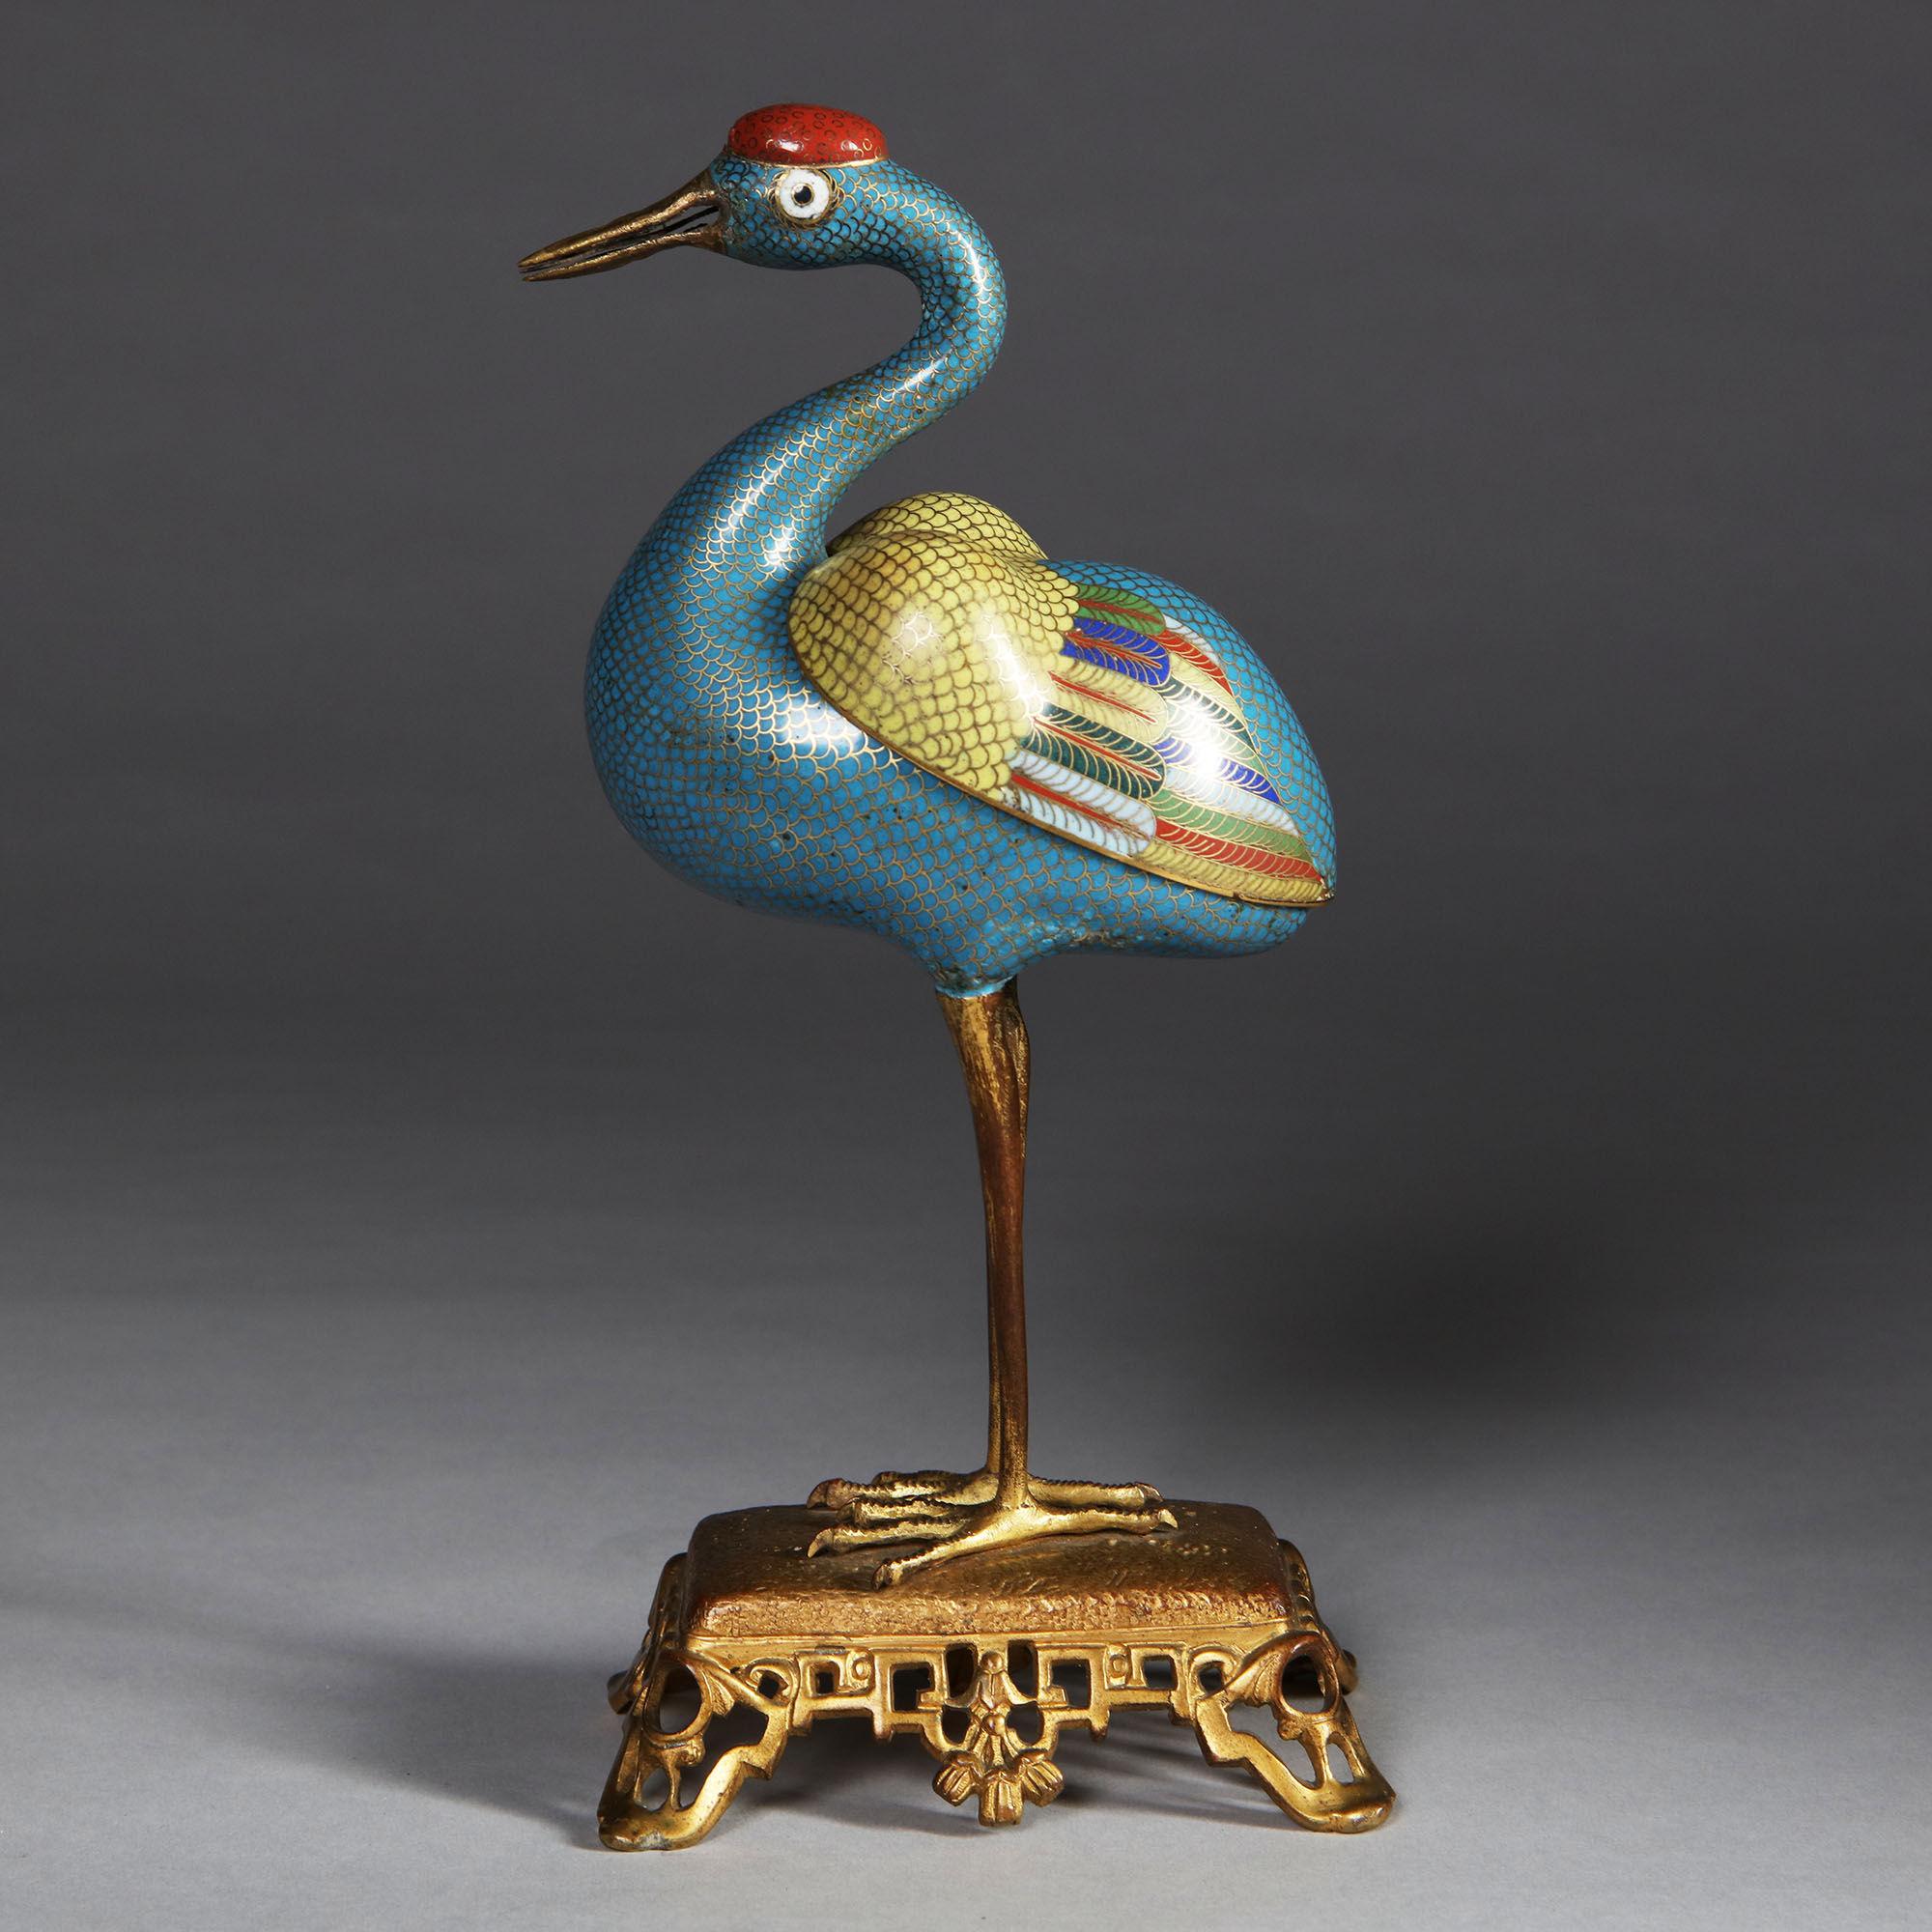 The characterful and charming 18th-19th century cloisonné enamel censer, is modelled as a crane with straight gilt-metal legs, realistically detailed feet and claws, standing on a detailed gilt base. The neck gracefully curved above the plump hollow